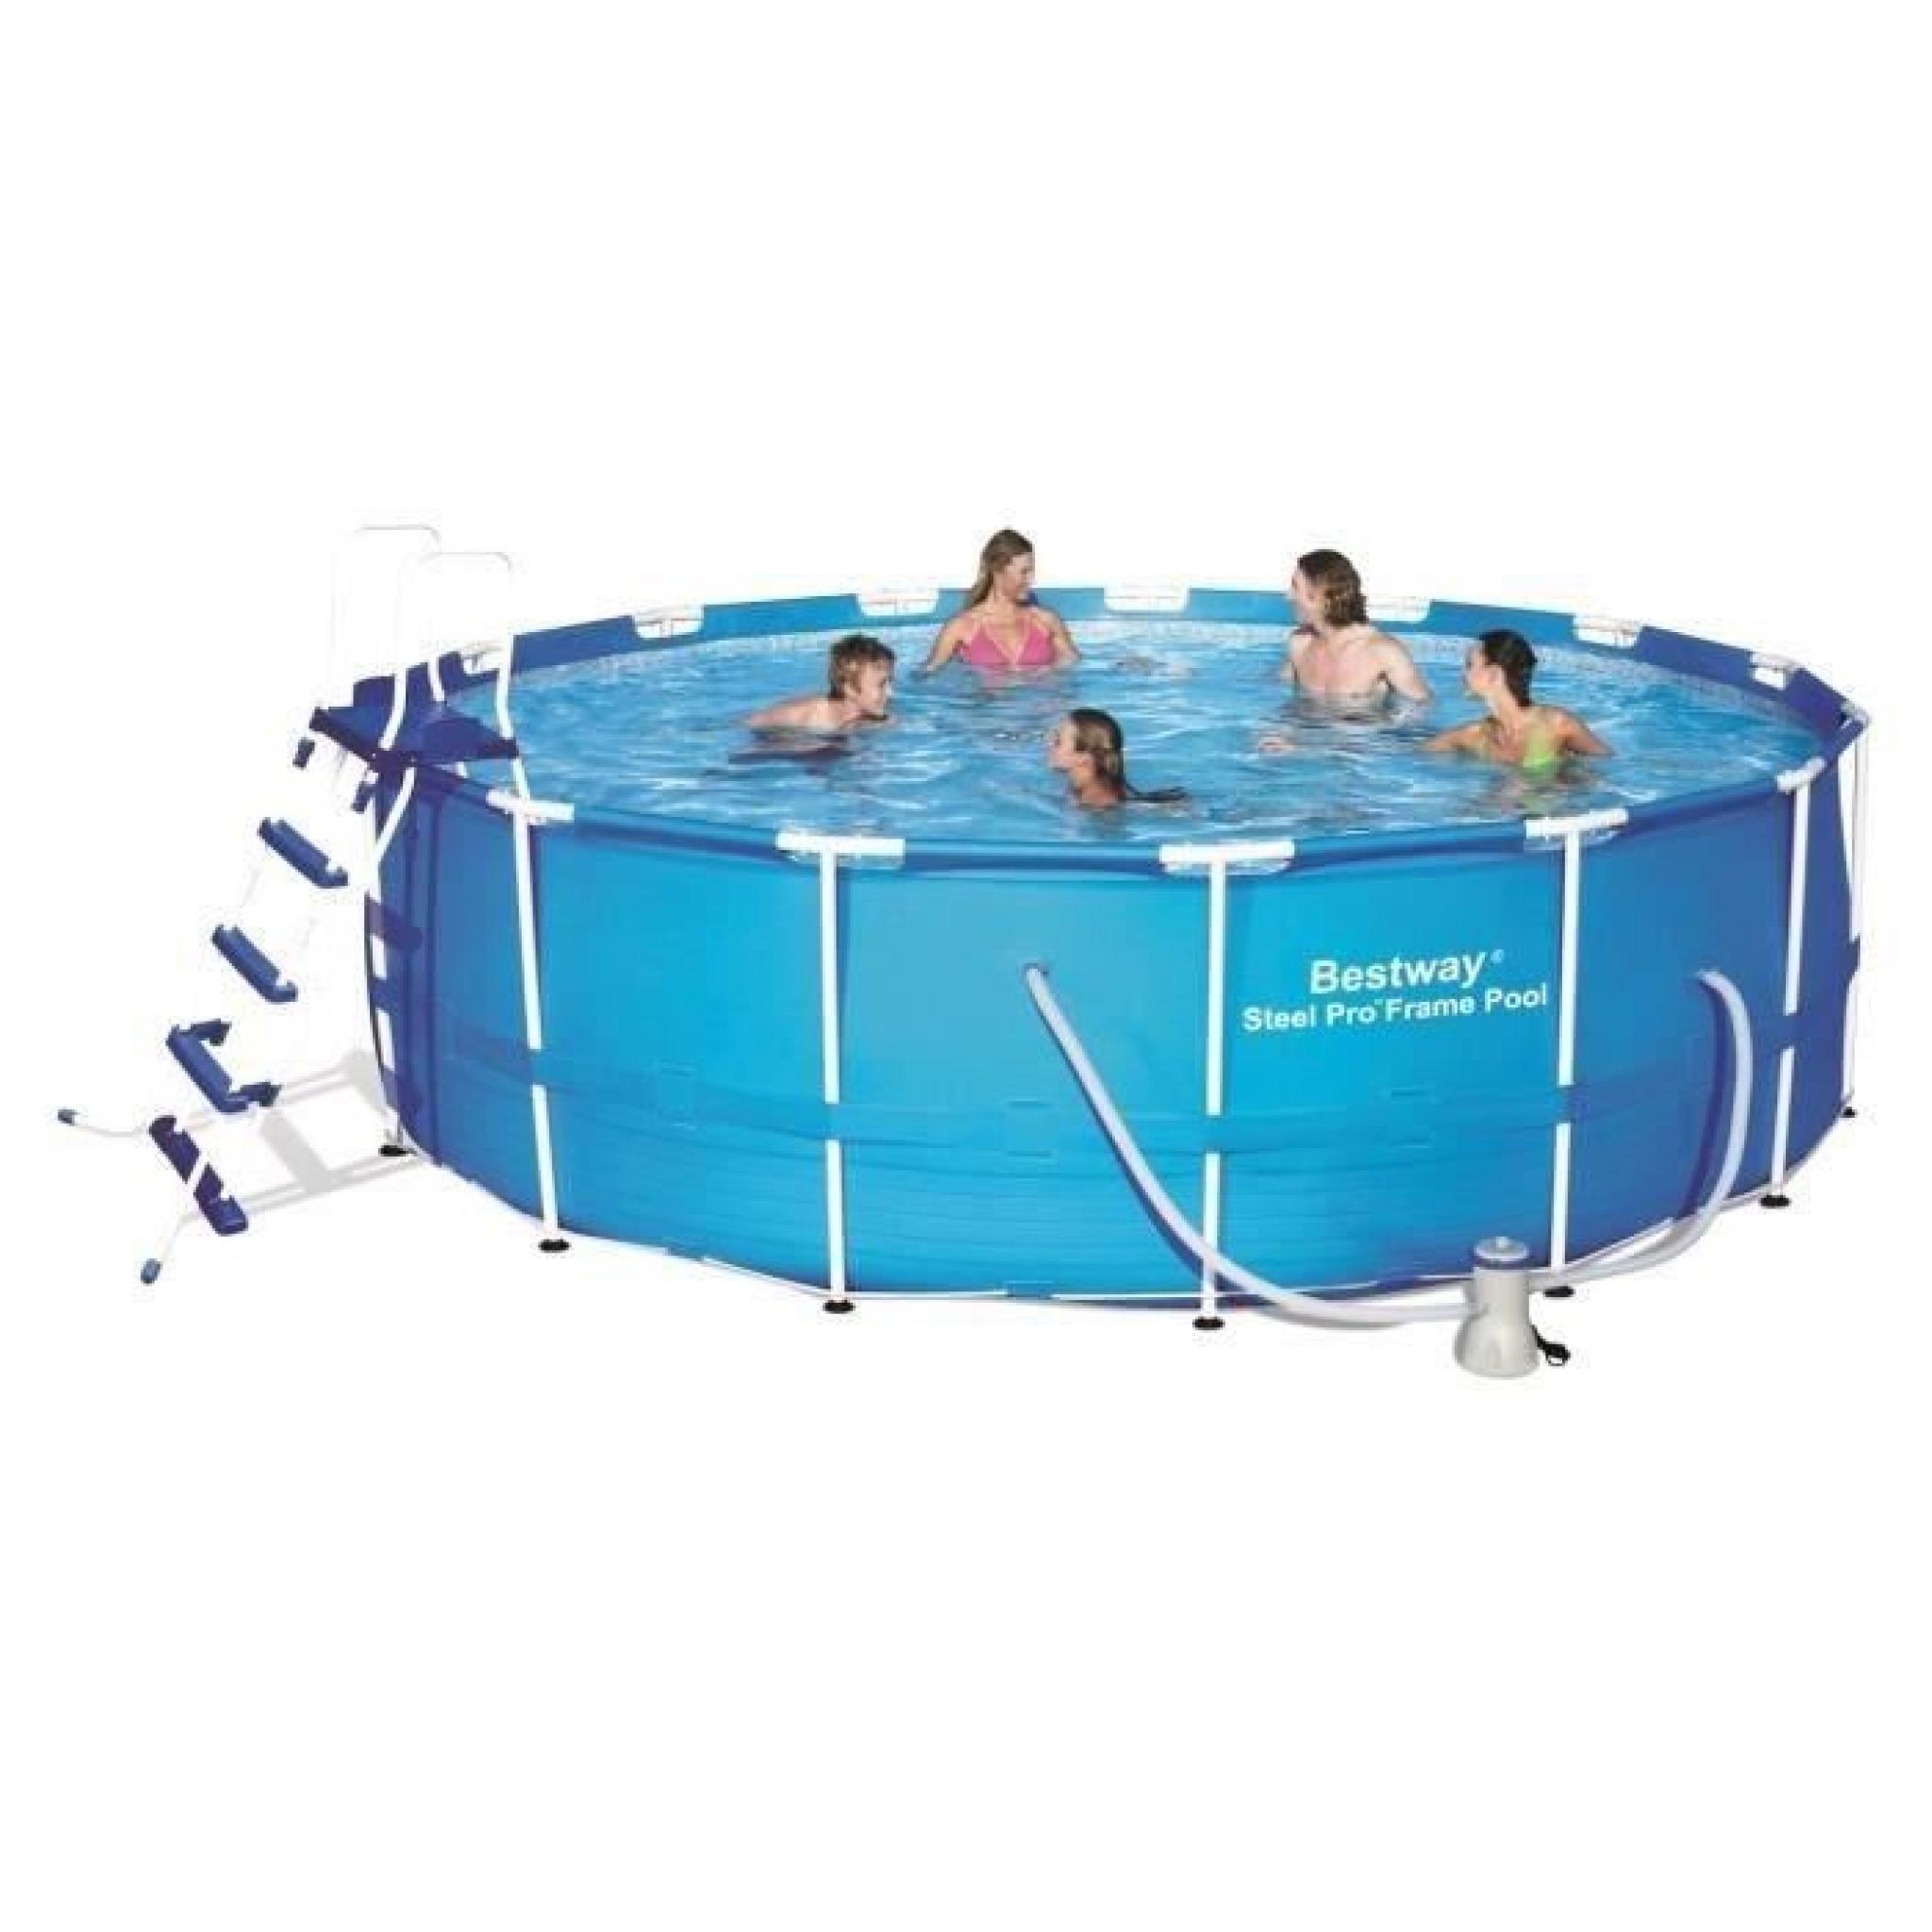 BESTWAY Piscine ronde tubulaire Steel Pro Frame Pool tubulaire 4,57x1,22 m